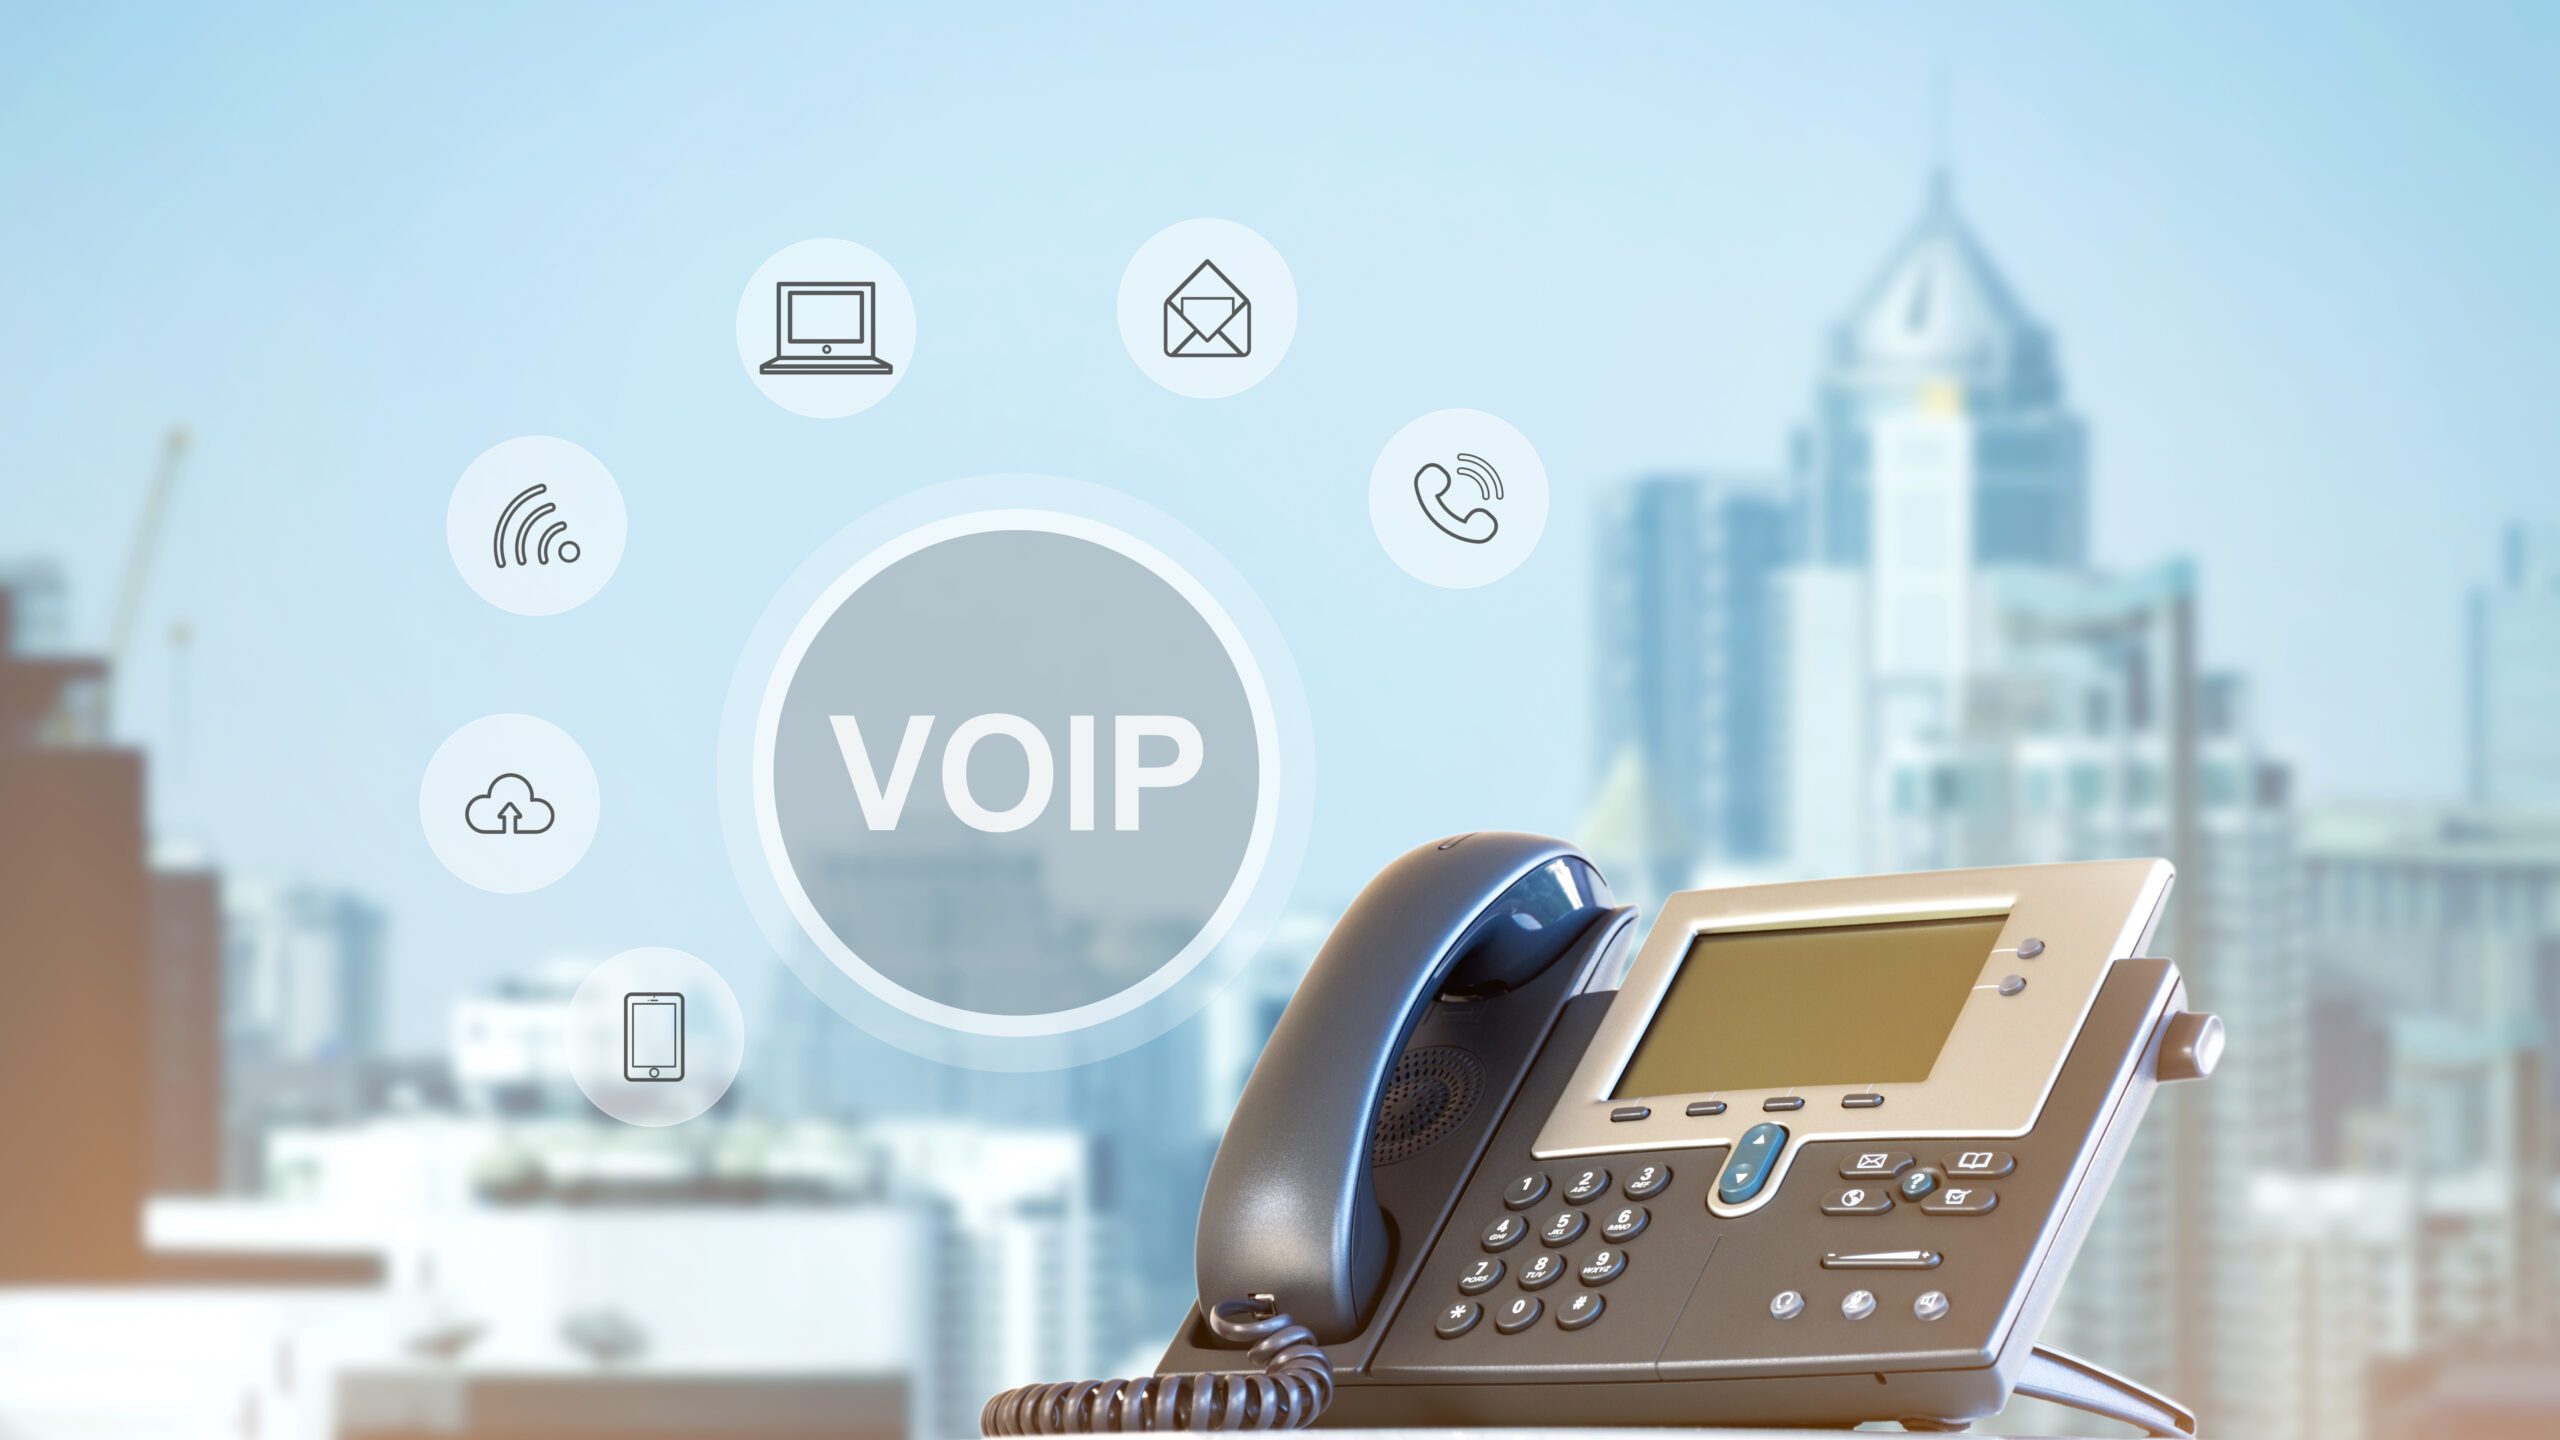 VOIP phone on city background